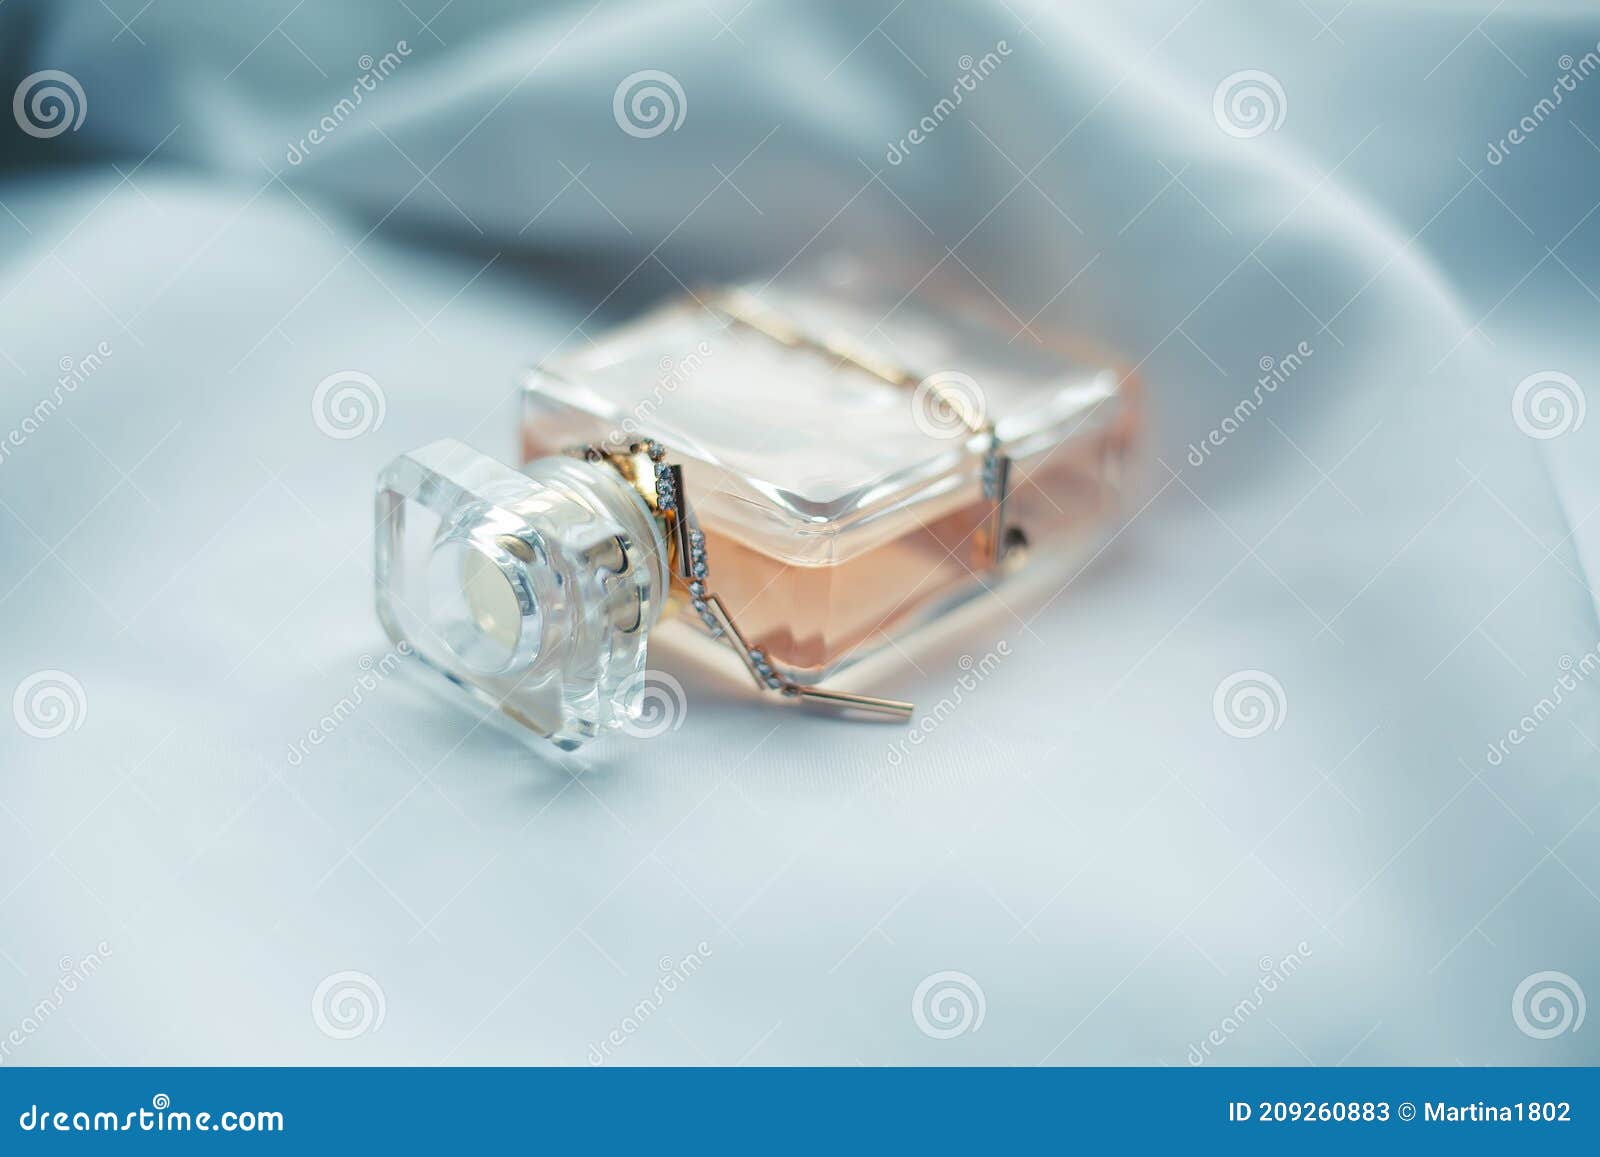 Perfume on Background of White Fabric in Waves Stock Image - Image of ...